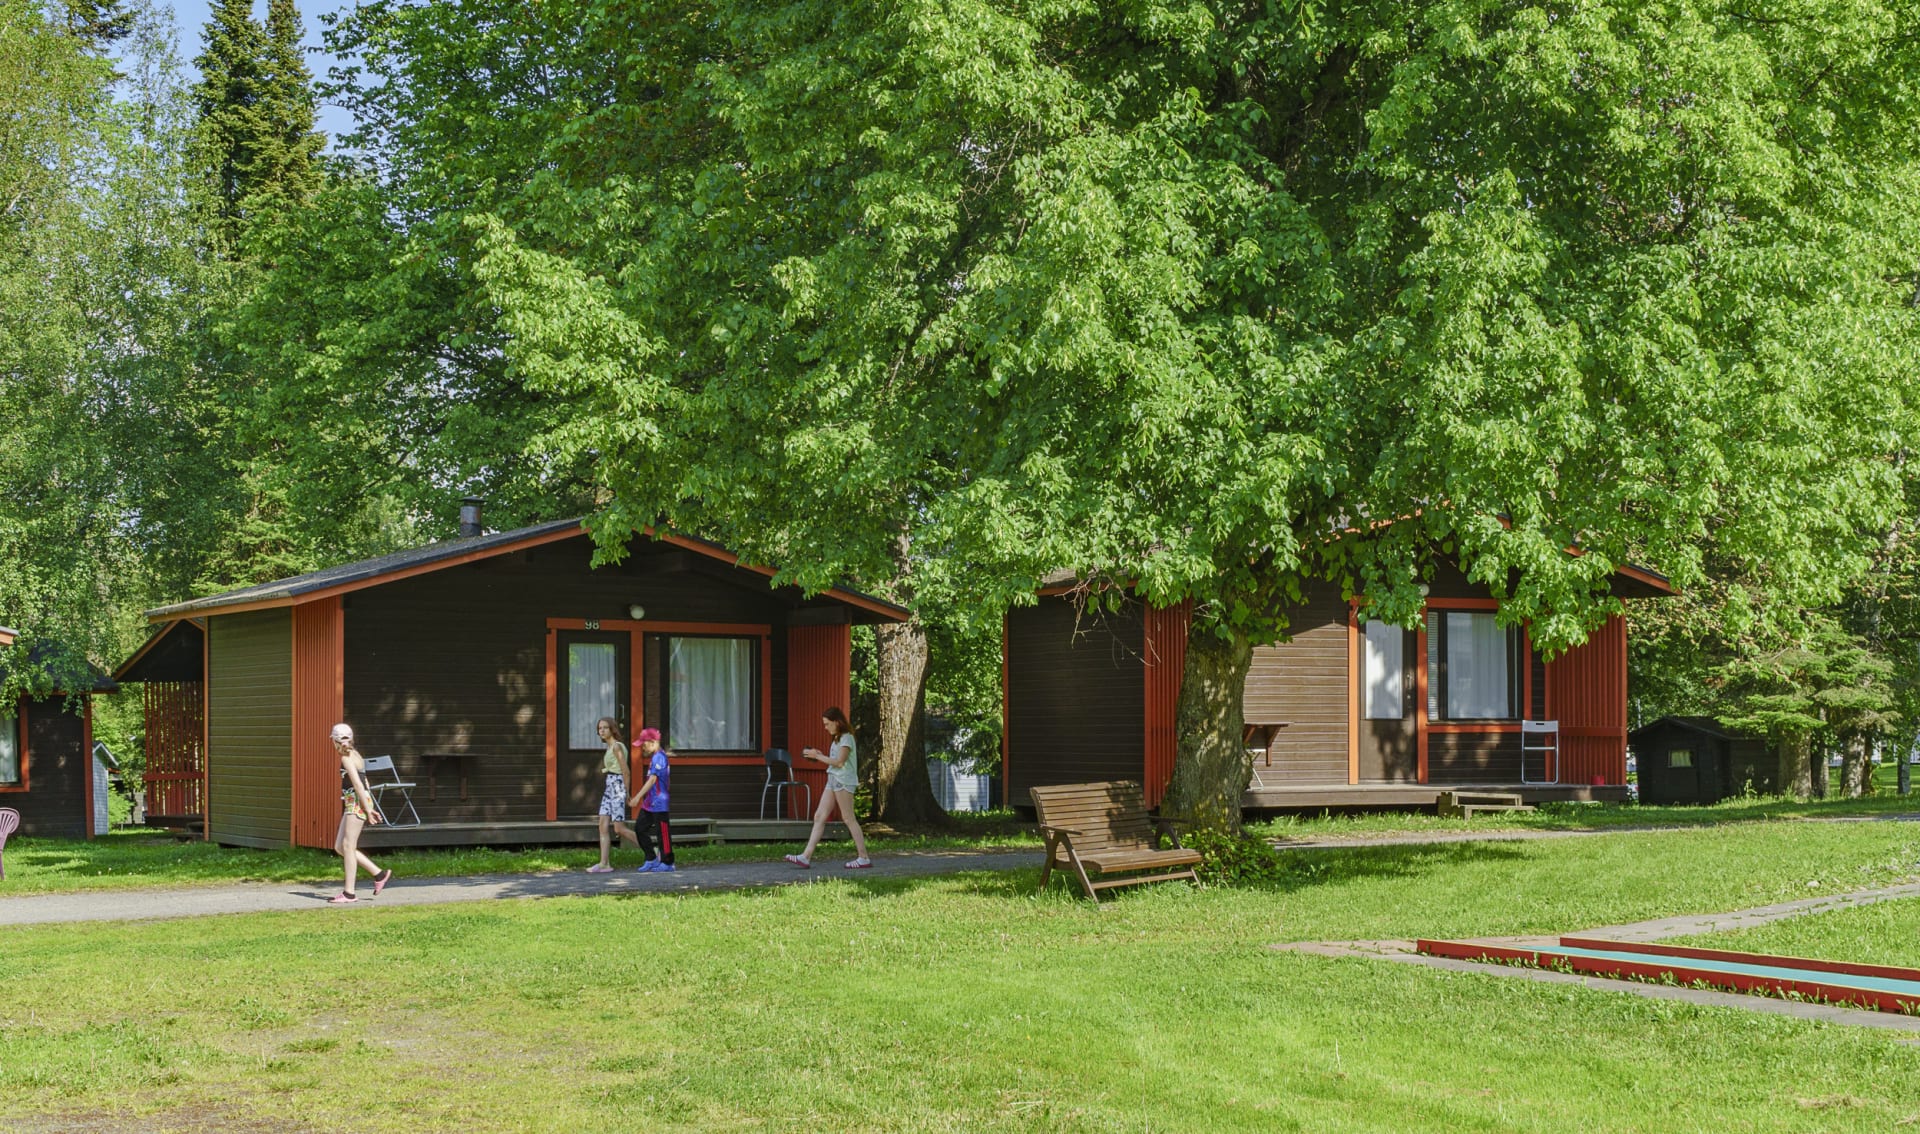 Härmälä Camping has nearly 100 cottages for 2-5 persons.